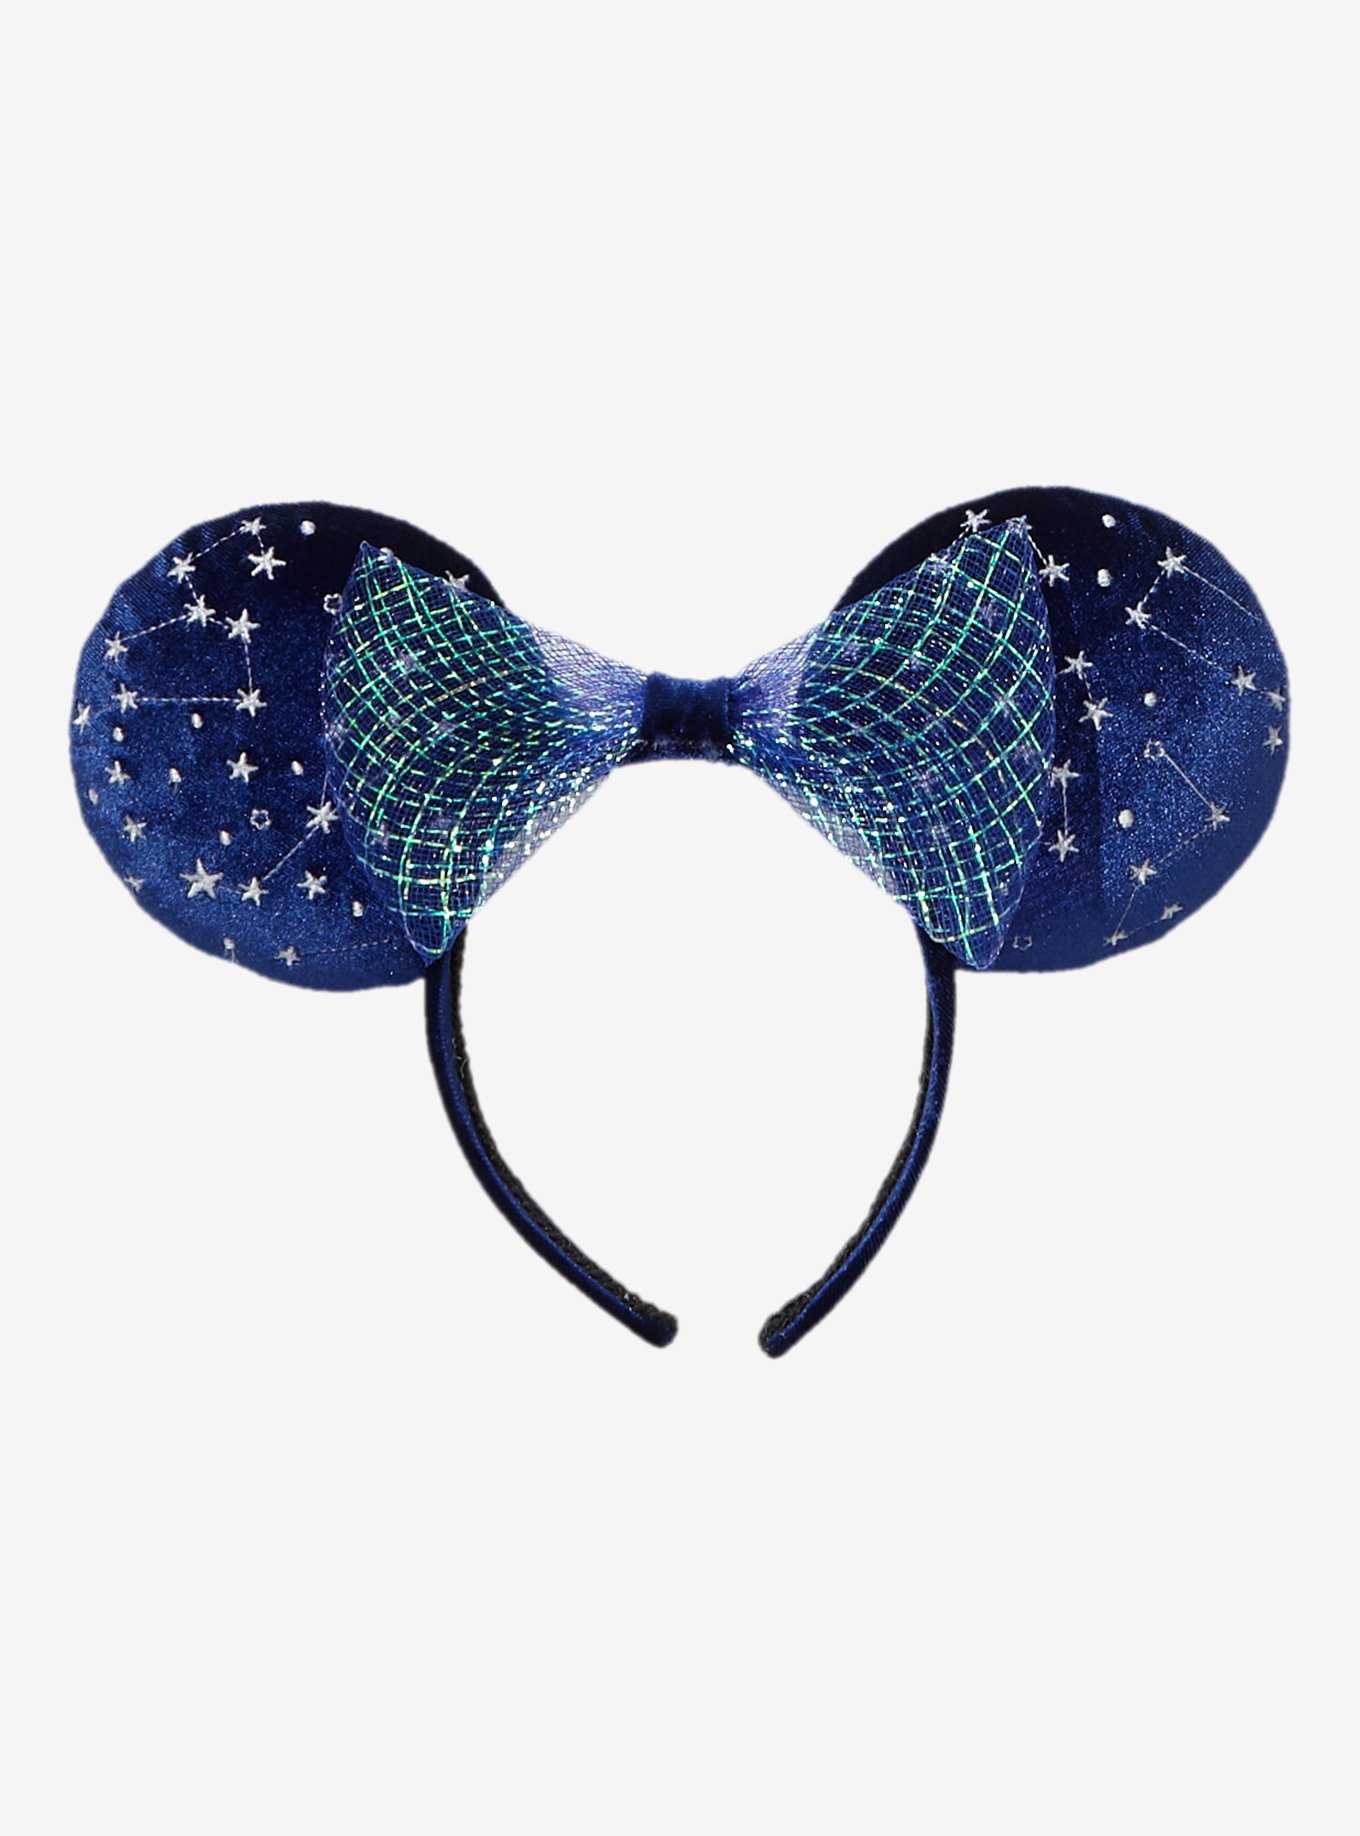 Disney Minnie Mouse Glow-in-the-Dark Constellation Ears Headband - BoxLunch Exclusive, , hi-res